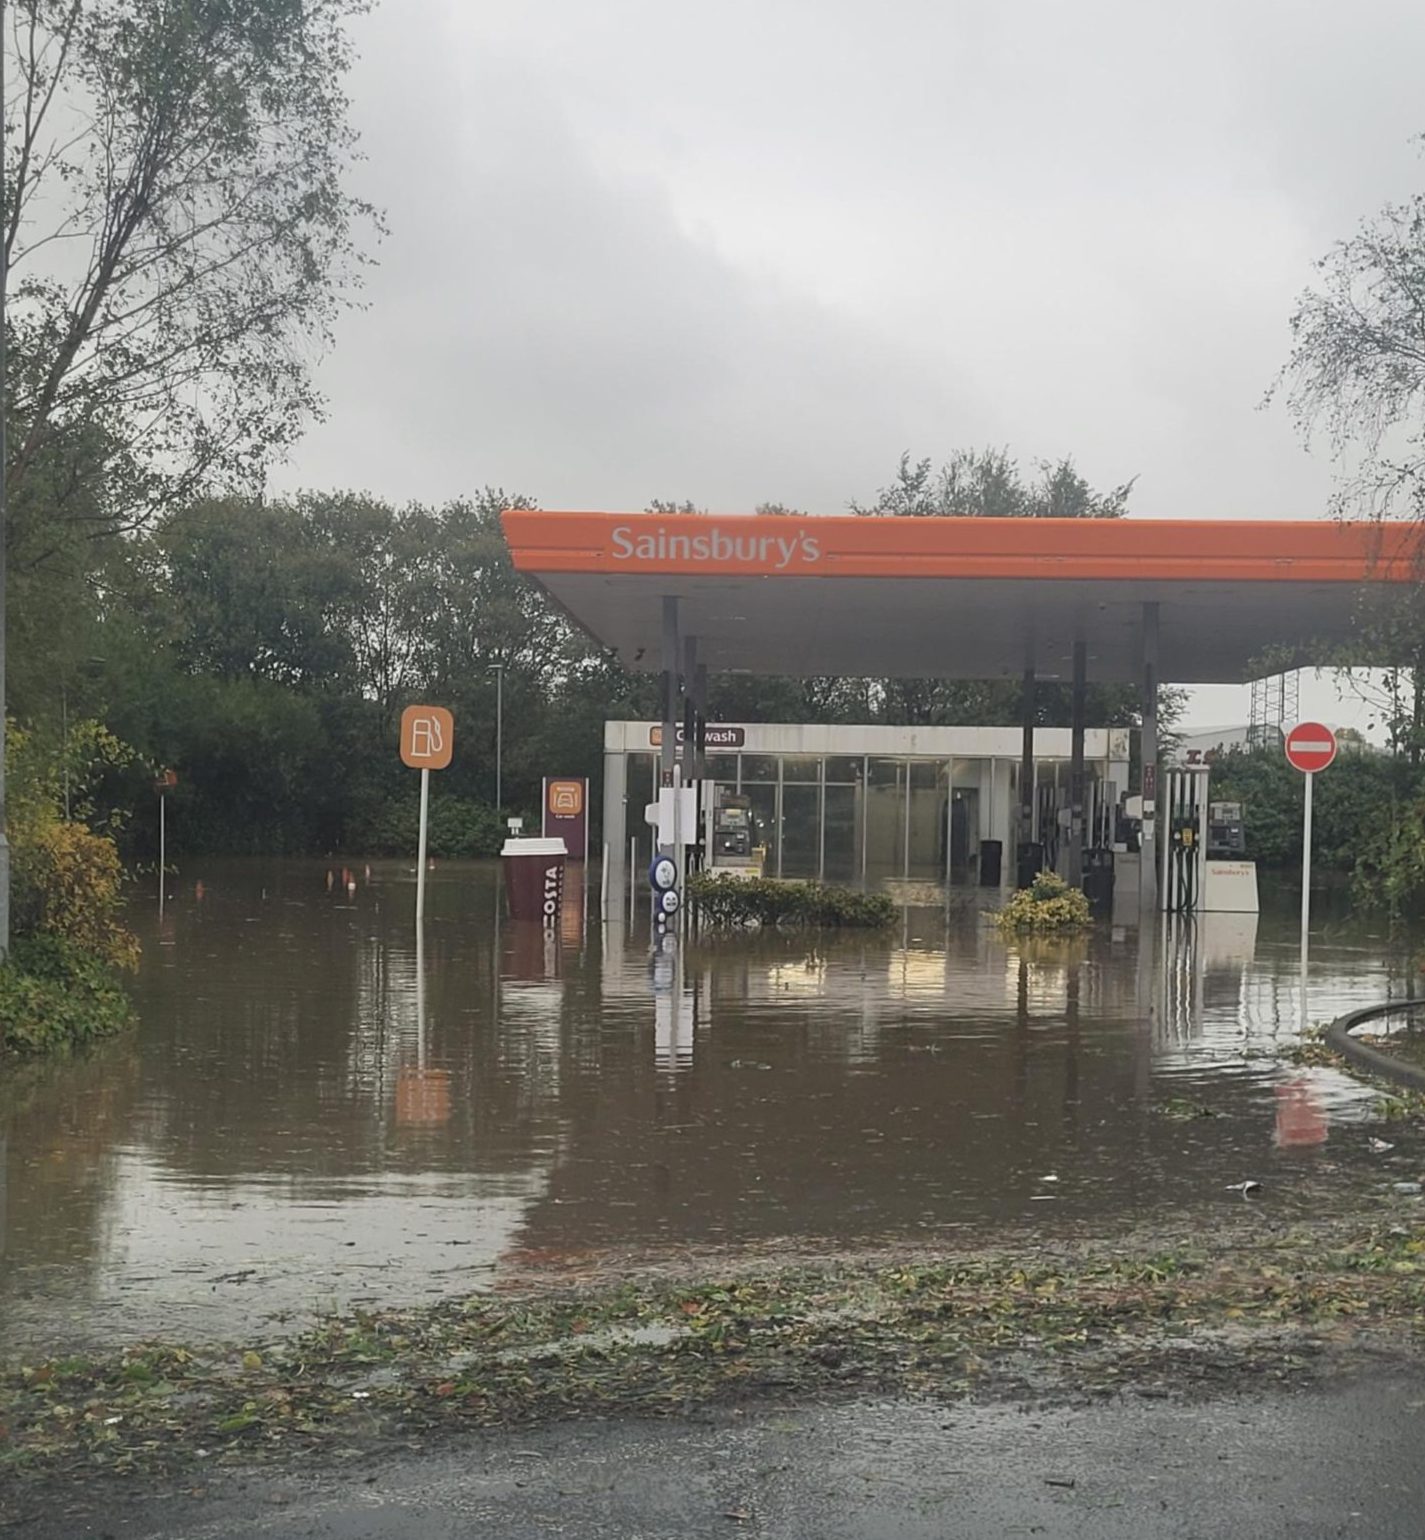 Dundee petrol station and Sainsbury's flooded during Storm Babet.